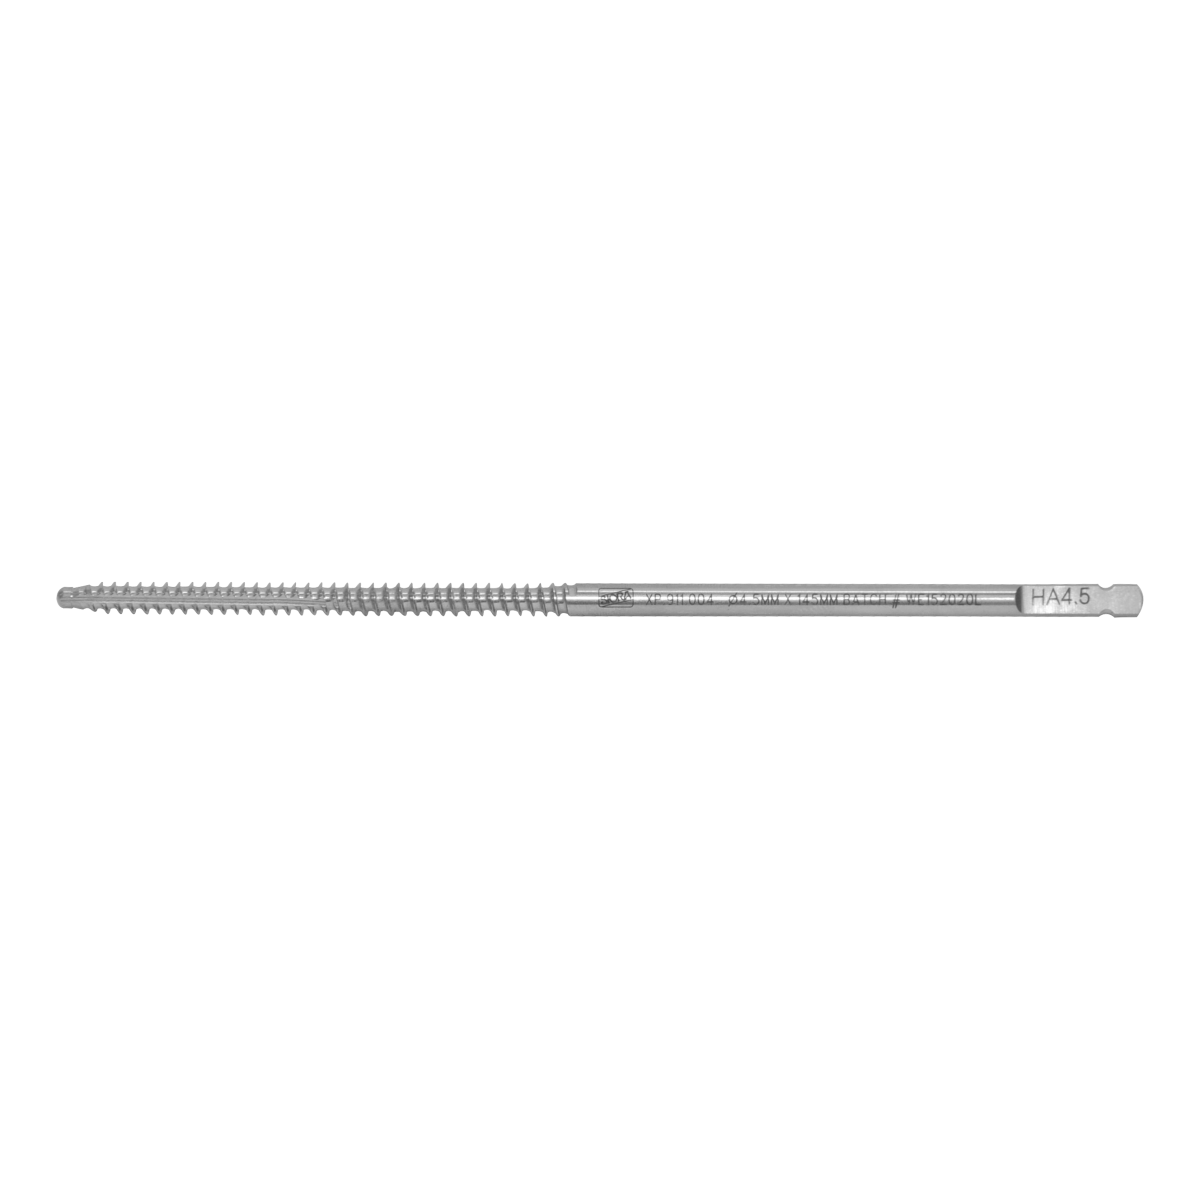 Bone-Tap-Quick-Coupling-End-Dia.-4.5mm-Thread-Length-70mm-Total-Length-145mm